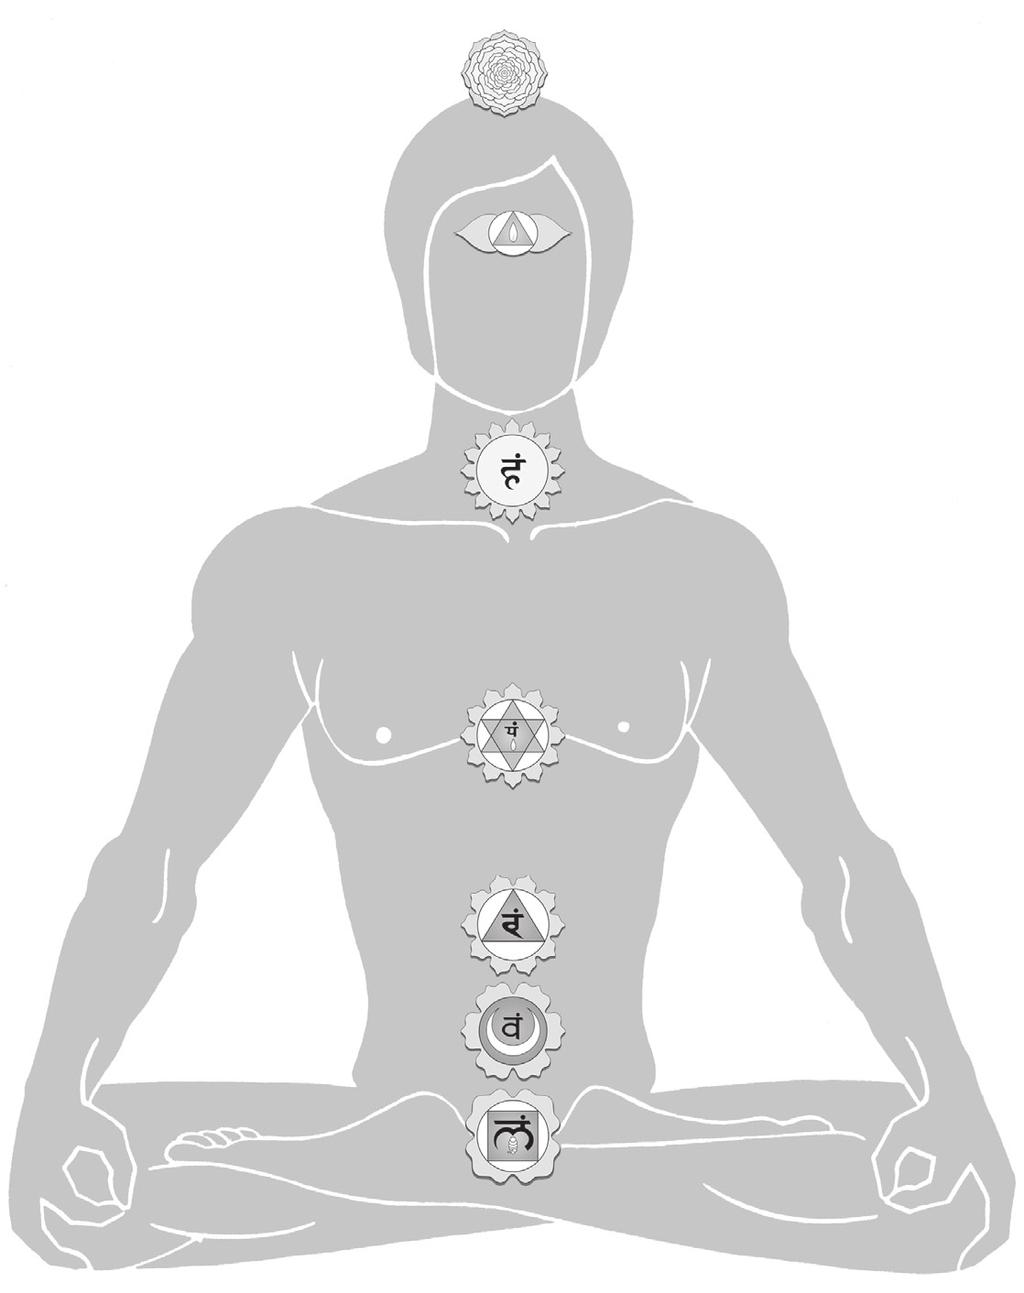 How Impurities Accumulate in the Body and Mind According to Ayurveda In the body, the psychological and physical aspects of being regulated by the first three chakras are the most susceptible to